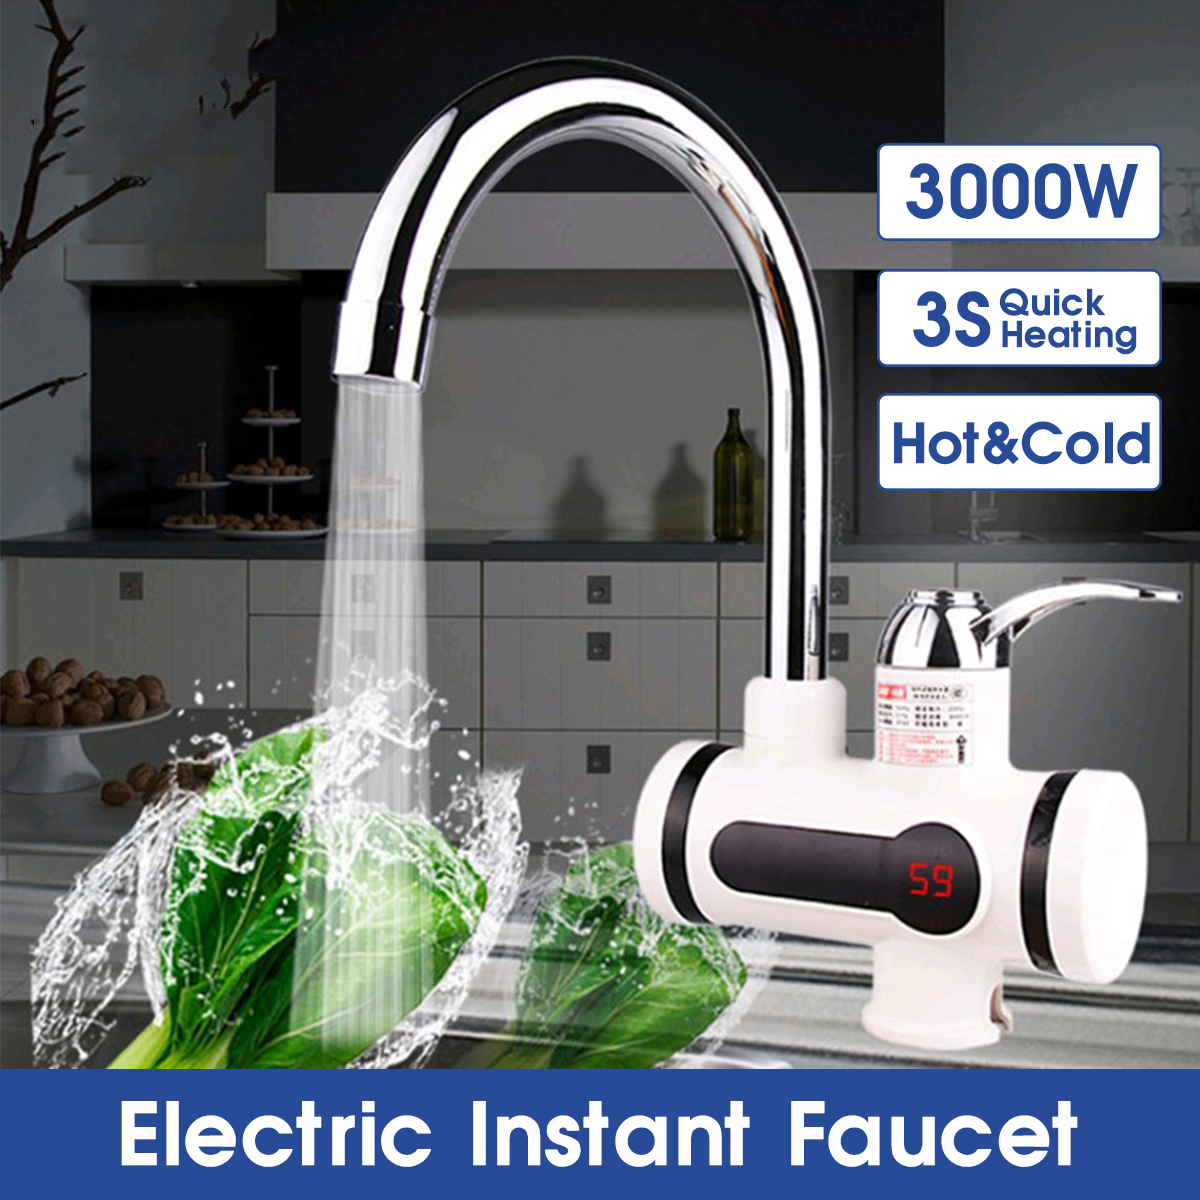 3000W-2-IN-1-Instant-Electric-Water-Heater-Faucet-Fast-Heating-LED-Display-220V-1584196-1